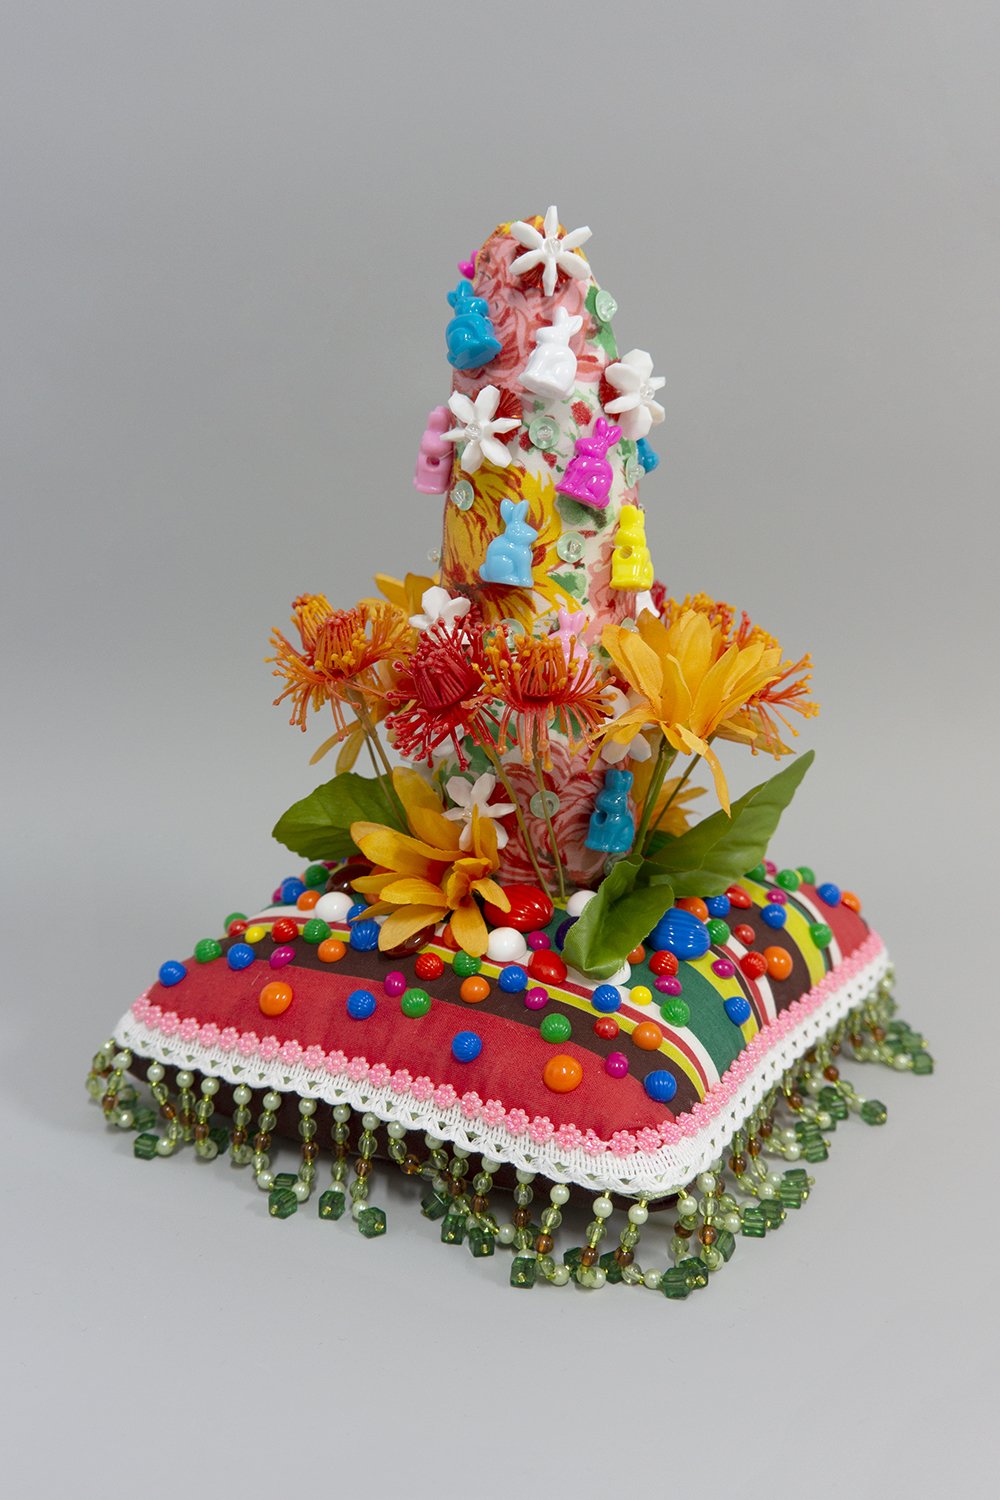   Untitled,  2022, Plastic beads and sequins, found fabric, trim, fabric and plastic flowers, cabochons, polyester batting, thread, 10 x 10.5 x 10.5” 